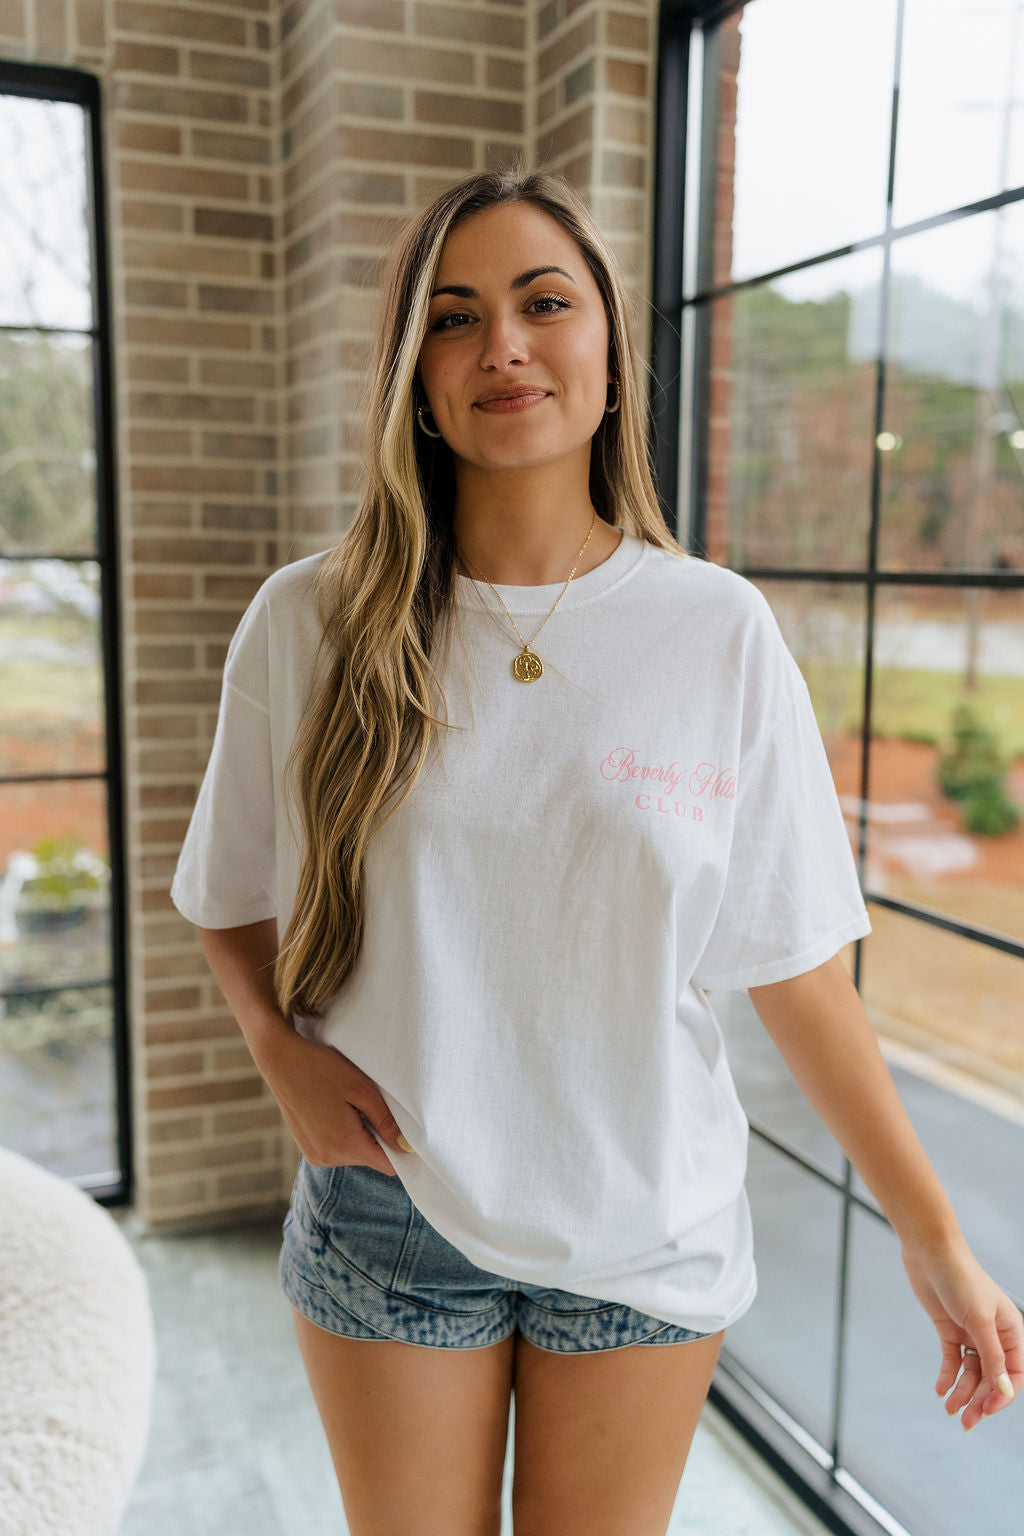 Front view of female model wearing the Beverly Hills Tennis Club Graphic Tee which features White Cotton Fabric, Round Neckline , Short Sleeves, Beverly Hills Tennis Club in pink and green writing.